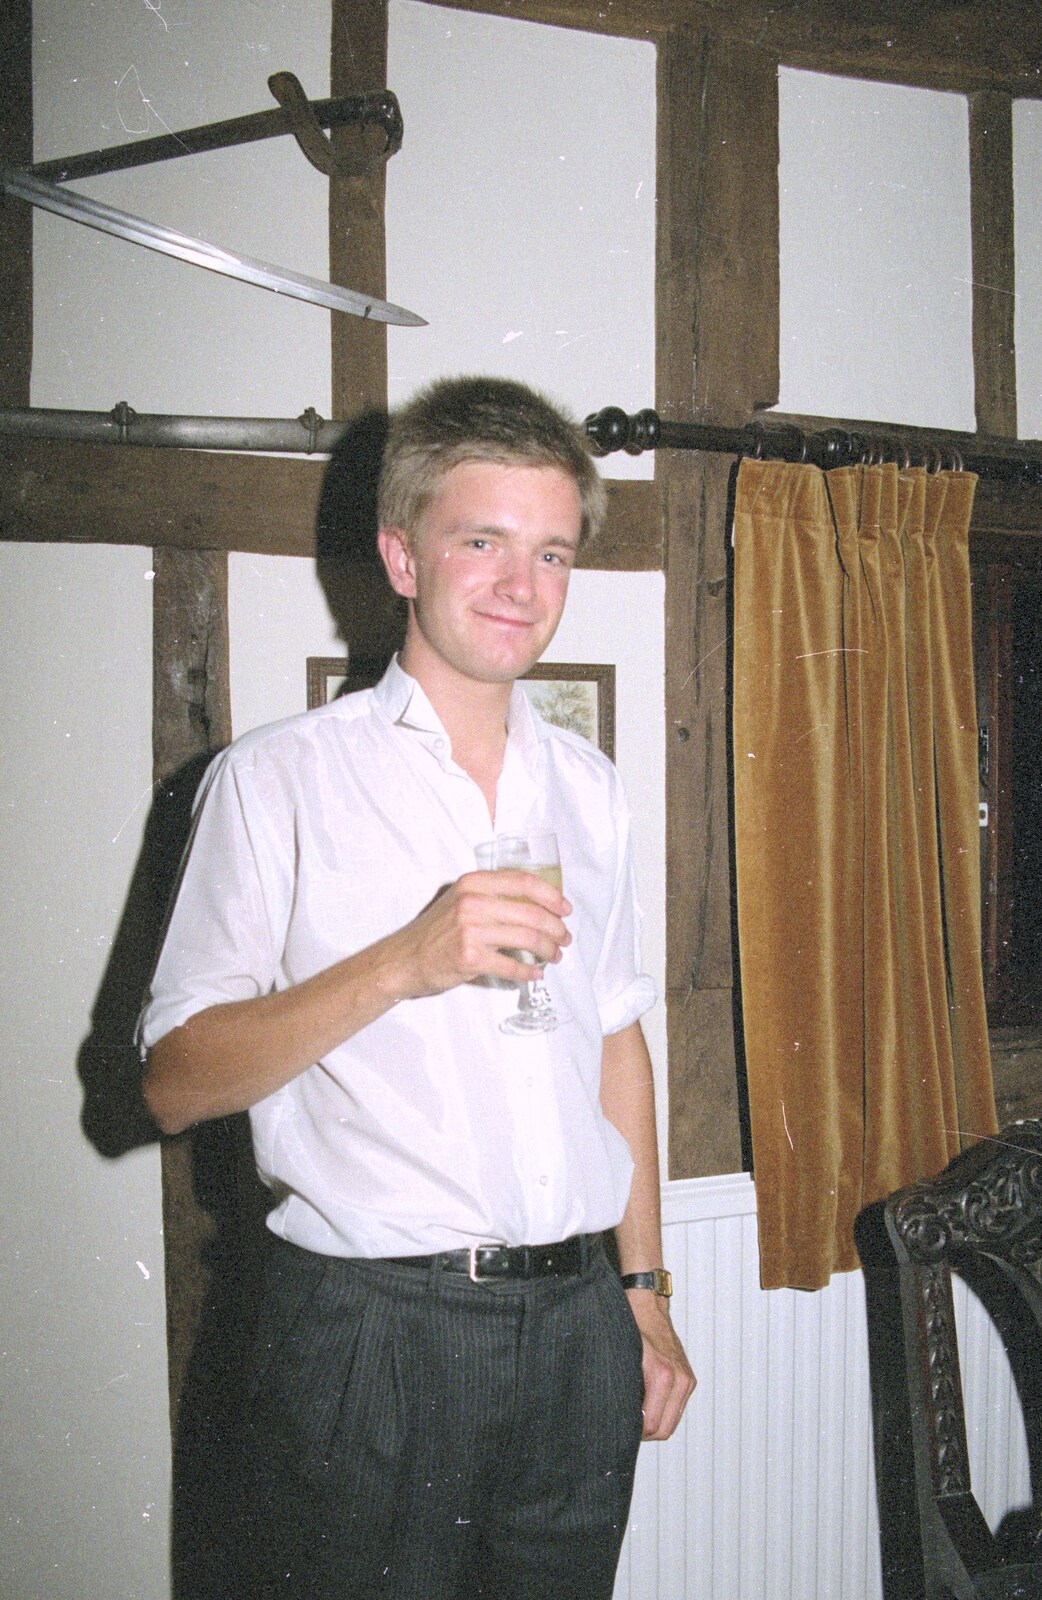 Nosher poses with a glass of fizz from Nosher's Dinner Party, Stuston, Suffolk - 14th September 1991